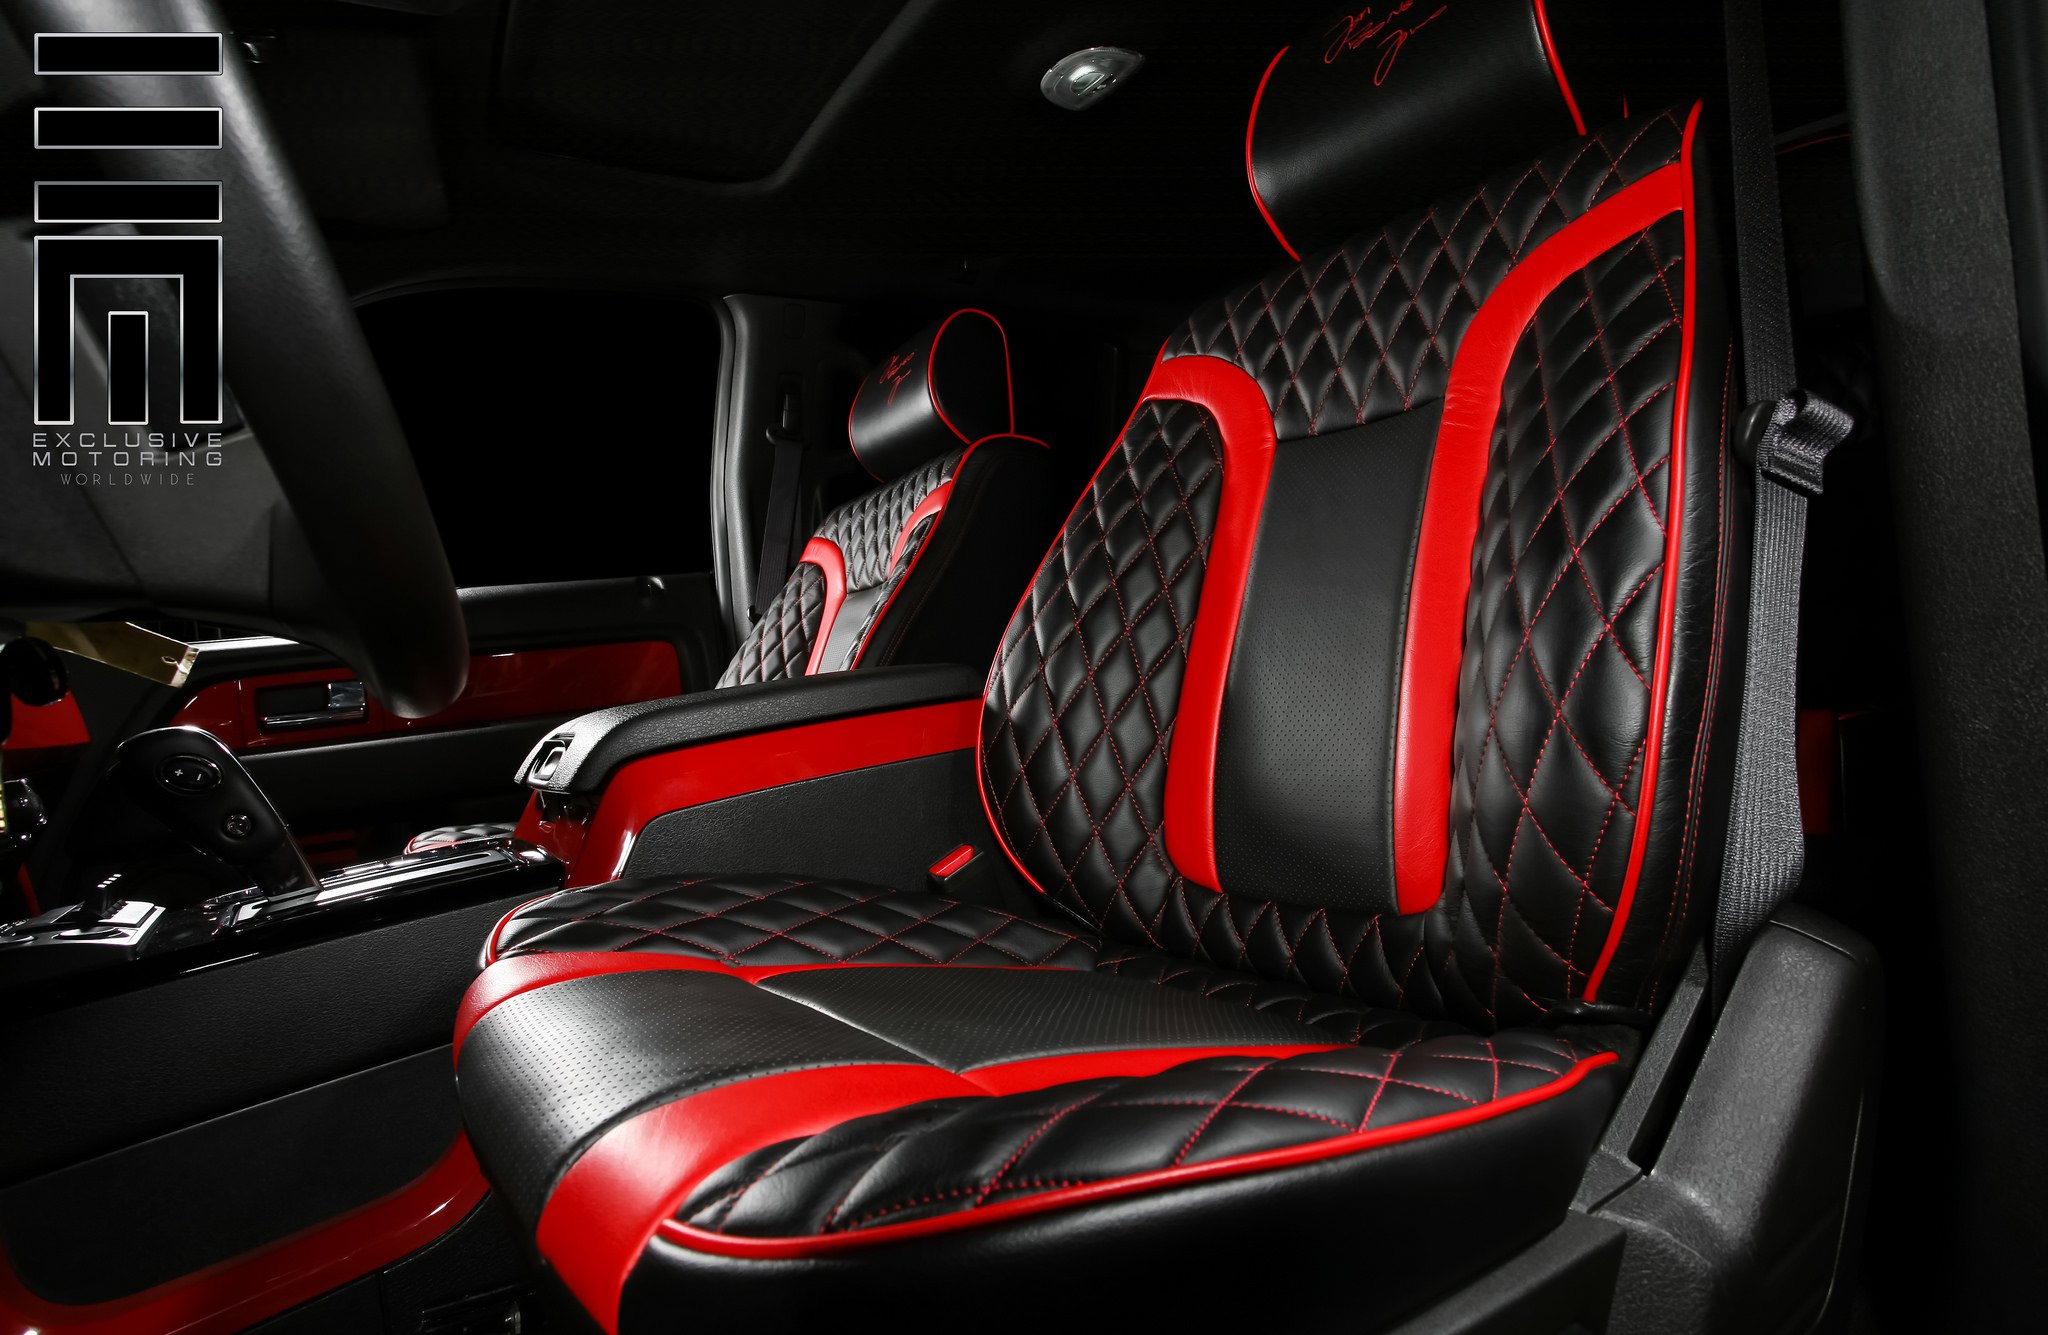 Stitched Leather Seats in F150 Raptor - Photo by Exclusive Motoring